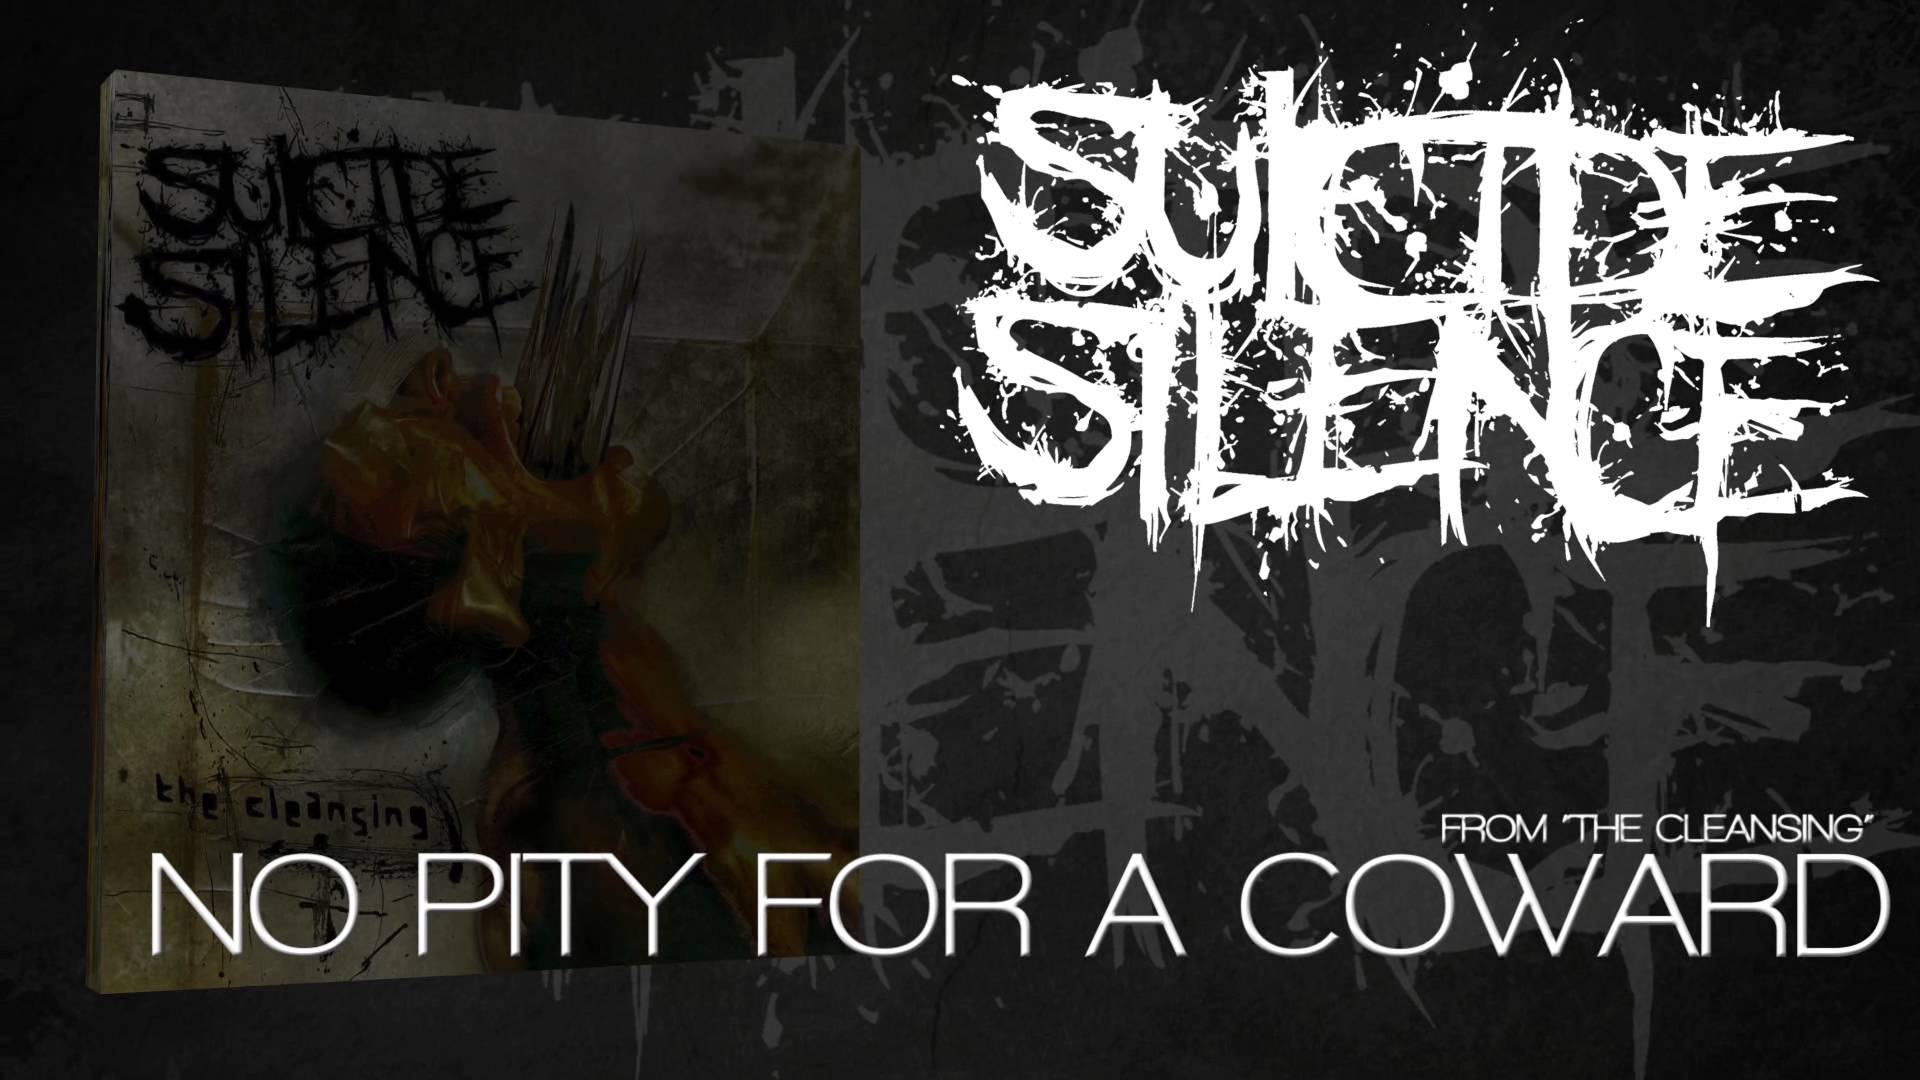 SUICIDE SILENCE Pity For A Coward (Album Track)